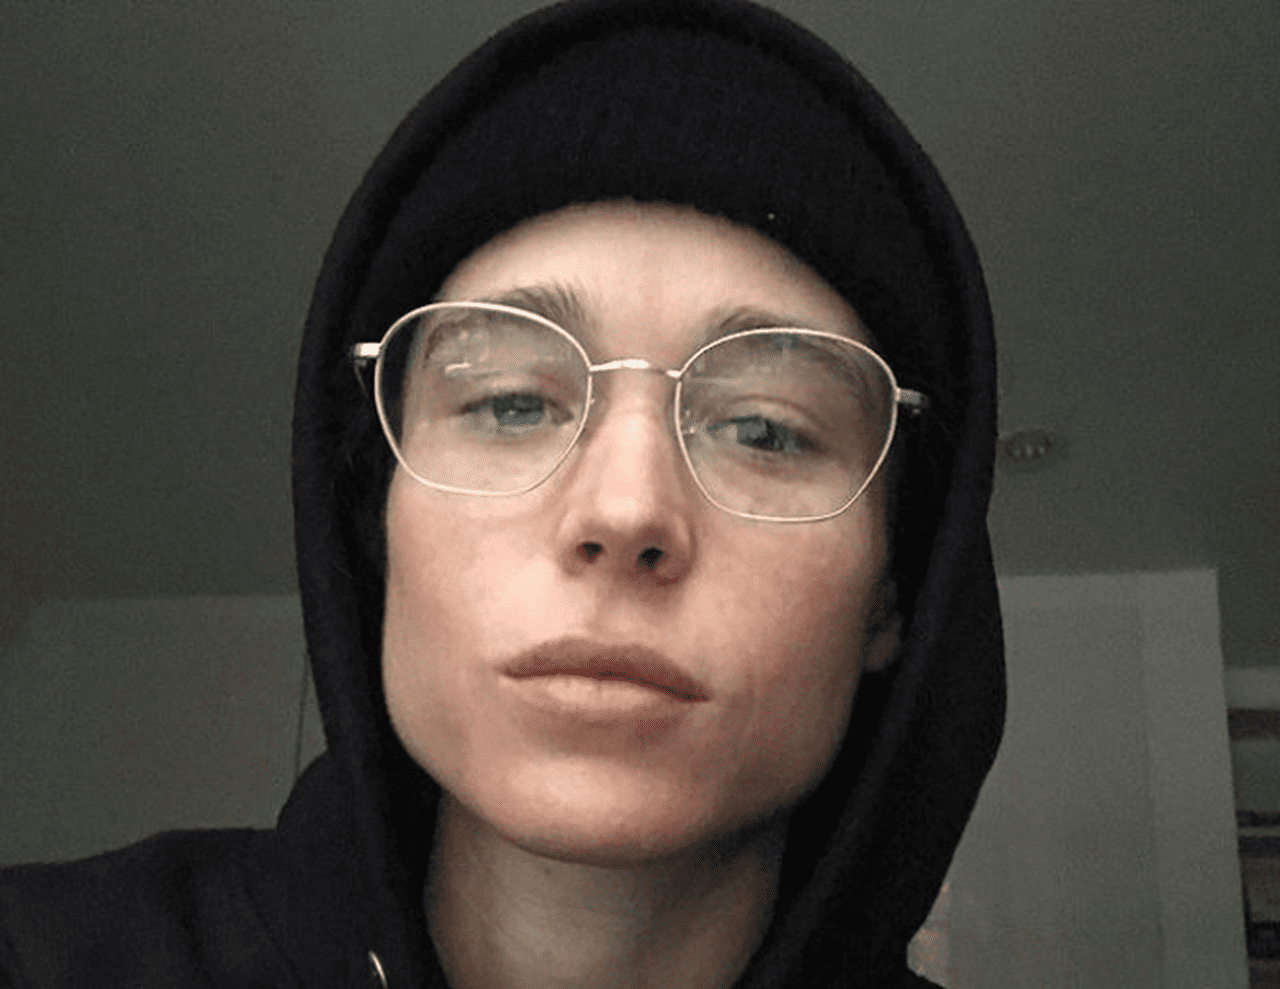 Elliot Page transgender coming out